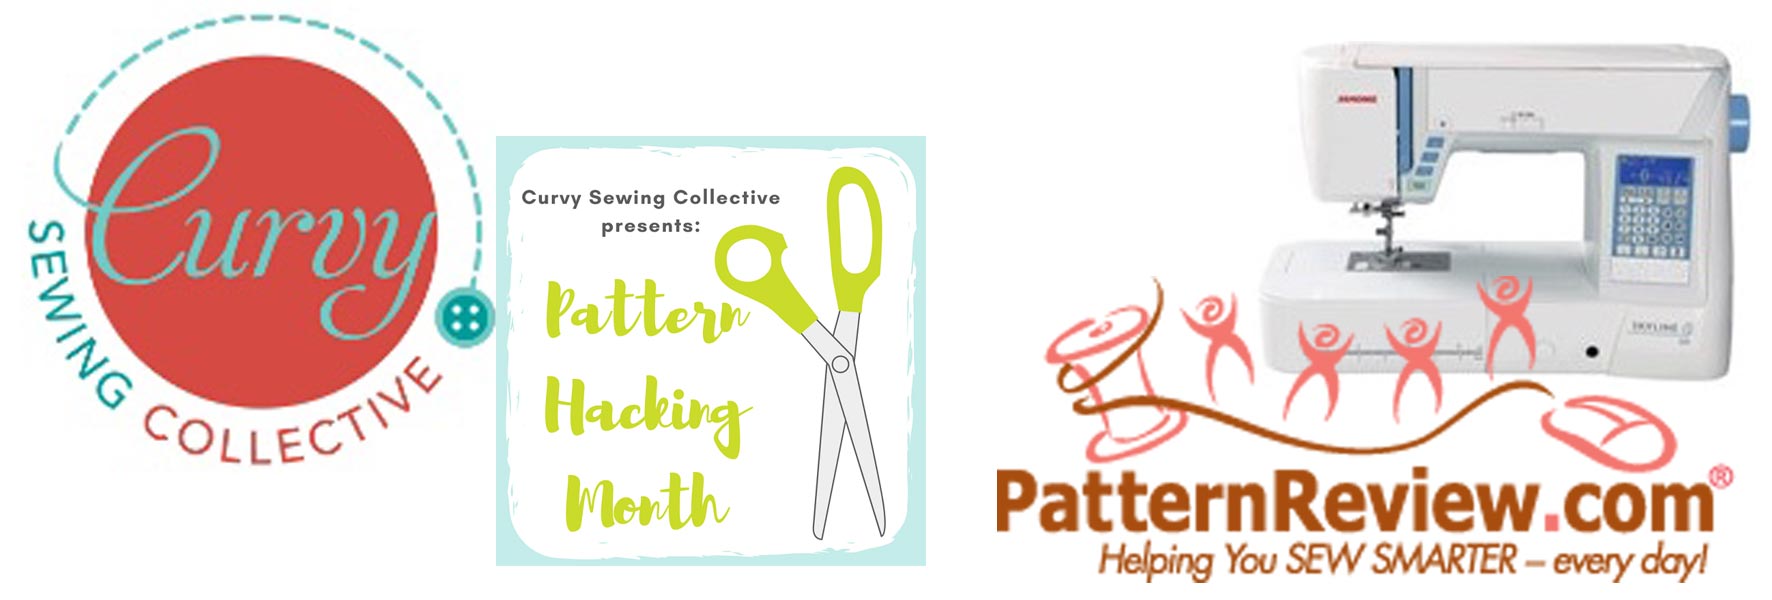 collage of logos and images from Curvy Sewing Collesctive and Sewing Pattern Review